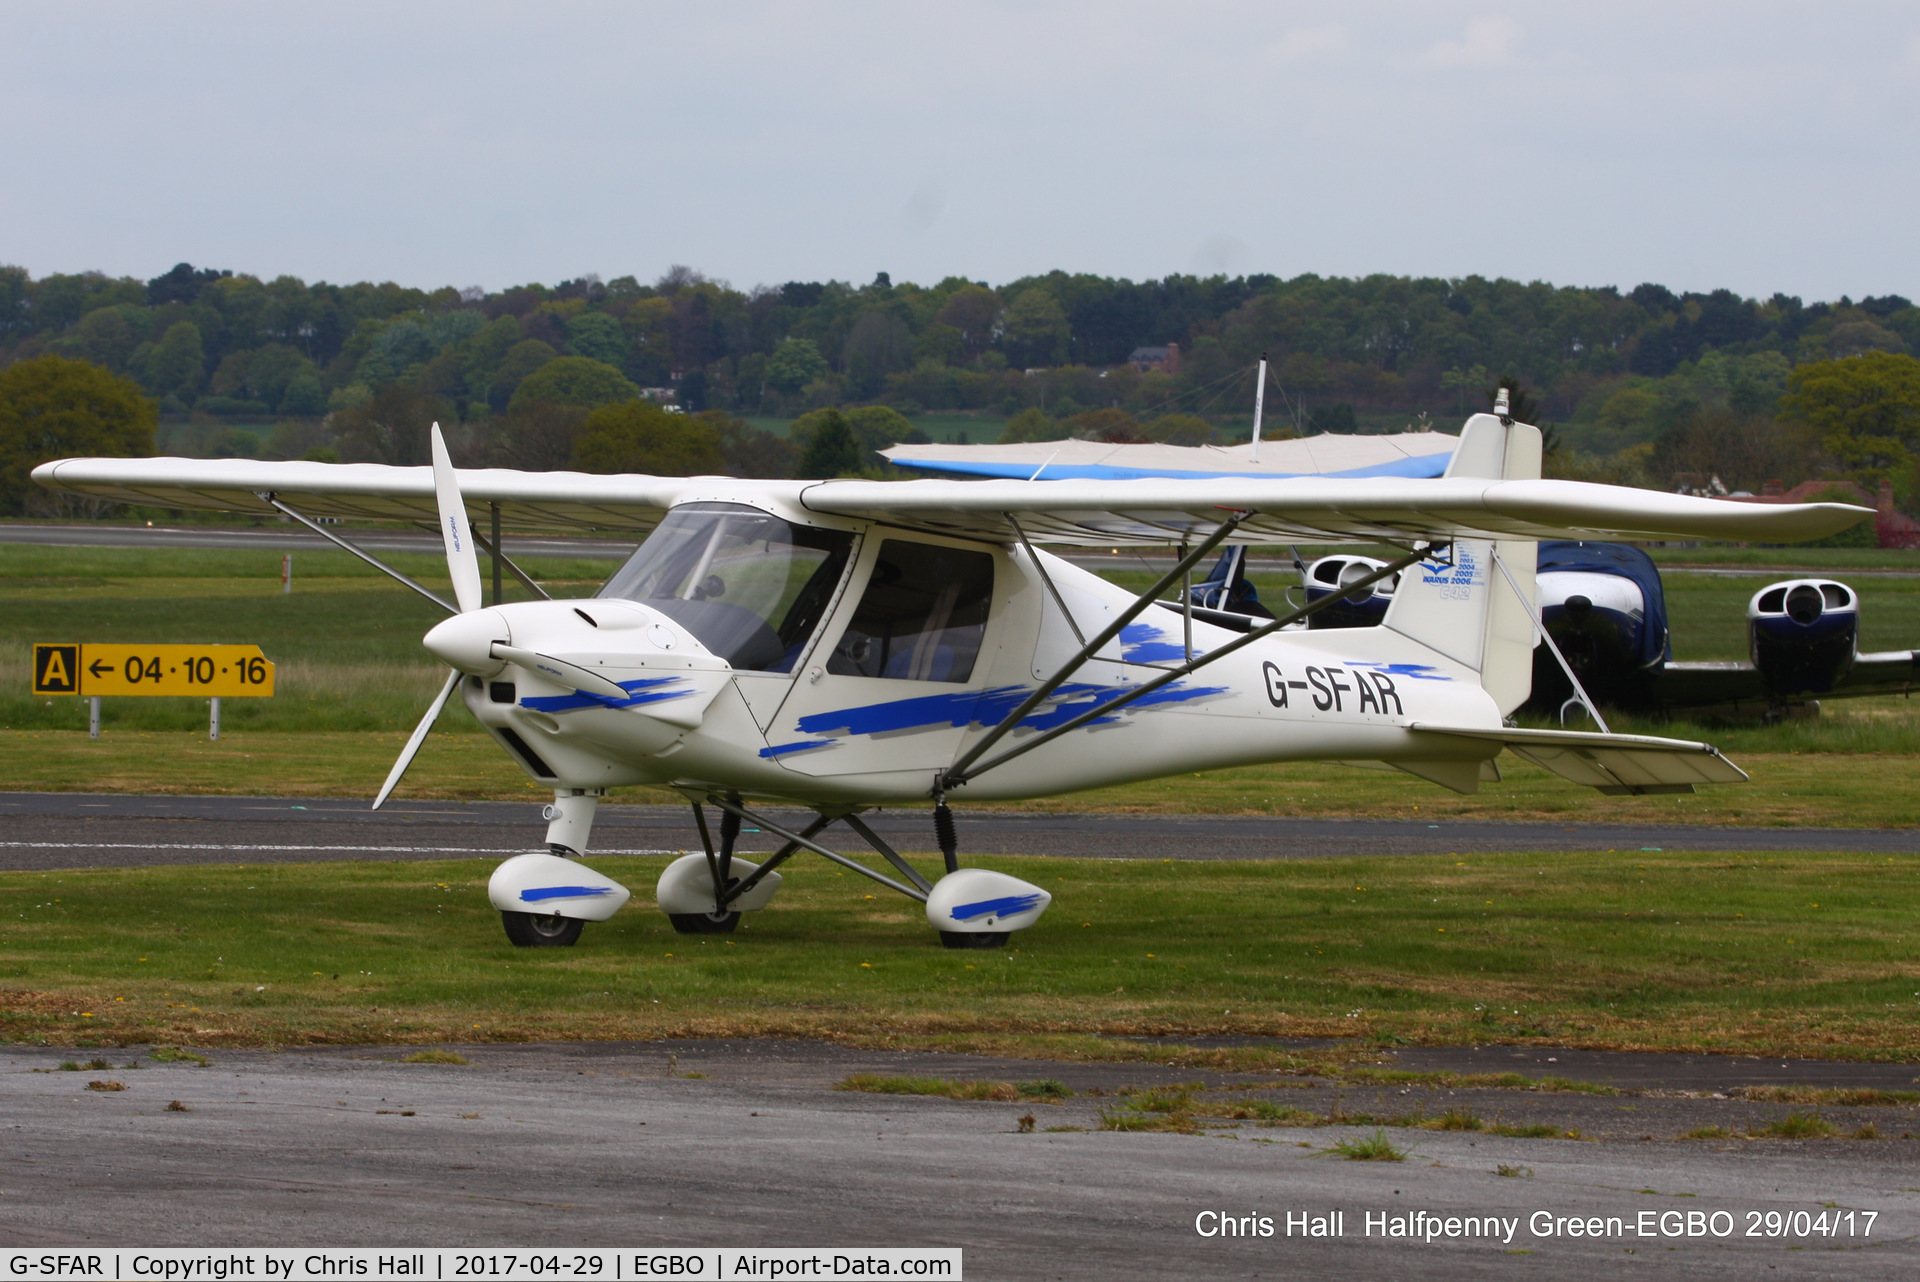 G-SFAR, 2007 Comco Ikarus C42 FB100 C/N 0704-6883, at the Radial & Trainer fly-in